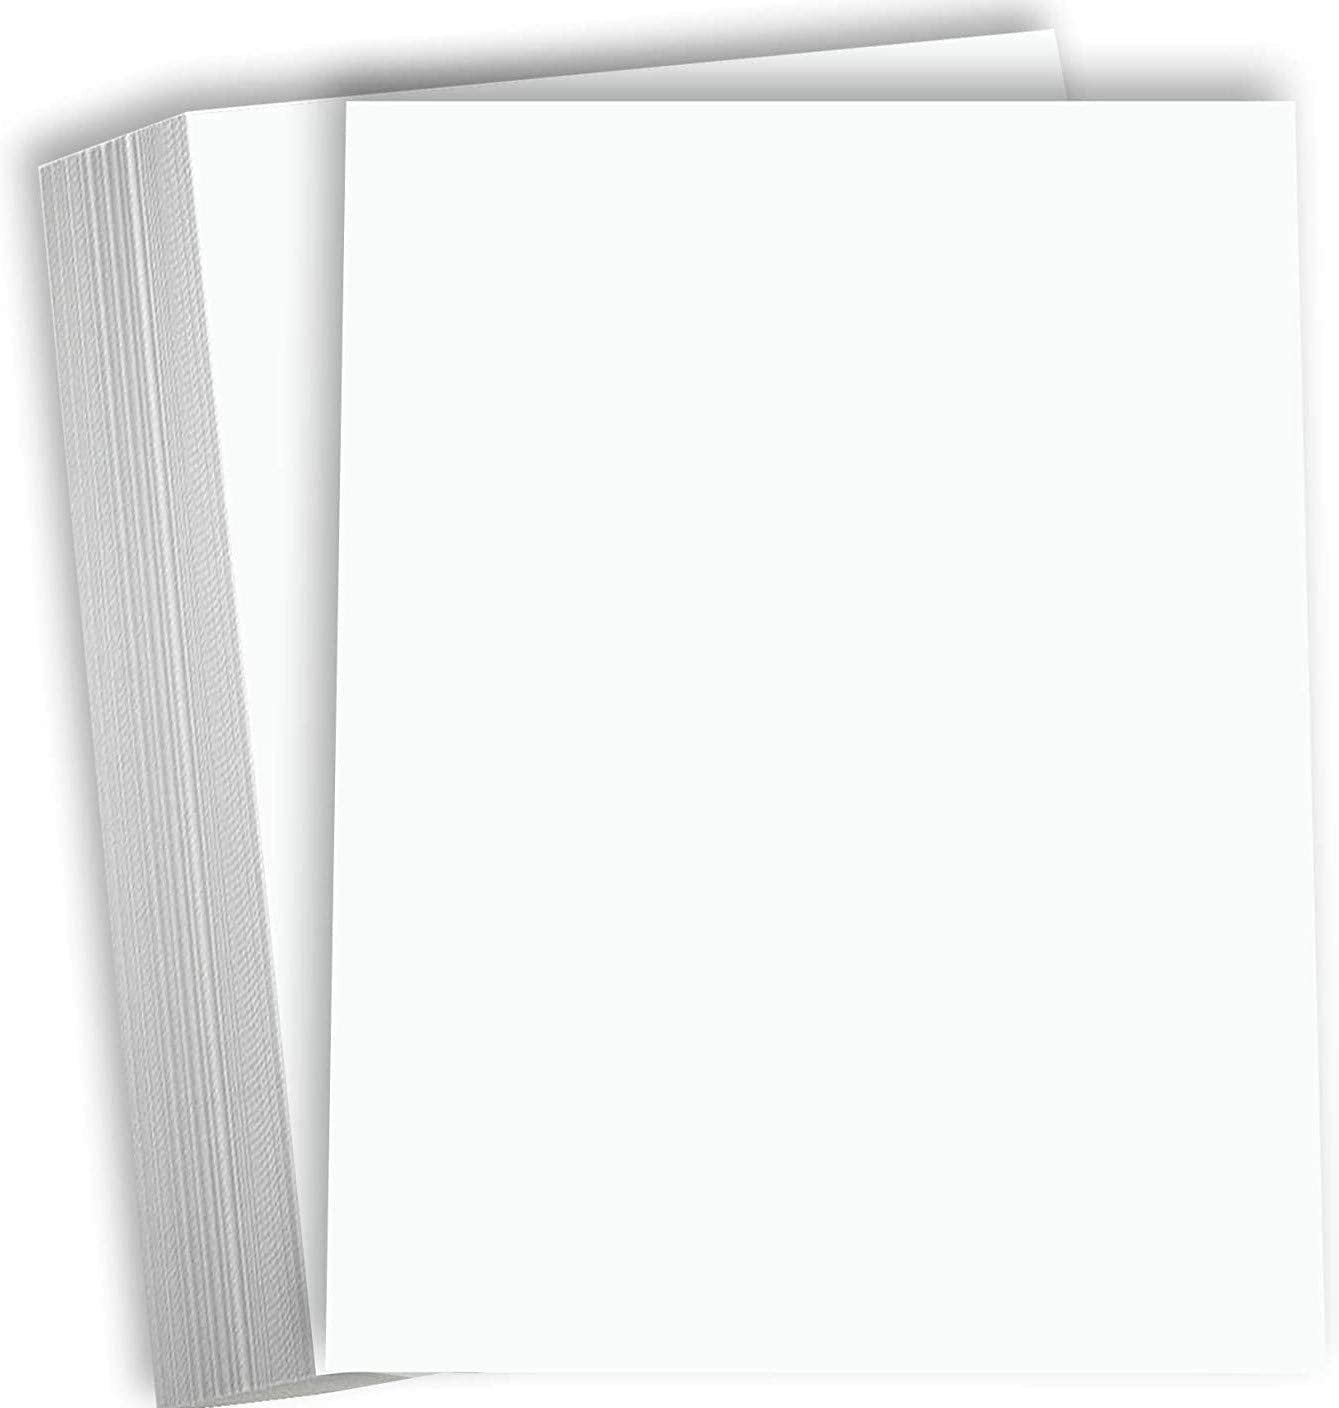 Bright White 100lb 8.5 x 11 Cardstock - 50 Pack - by Jam Paper